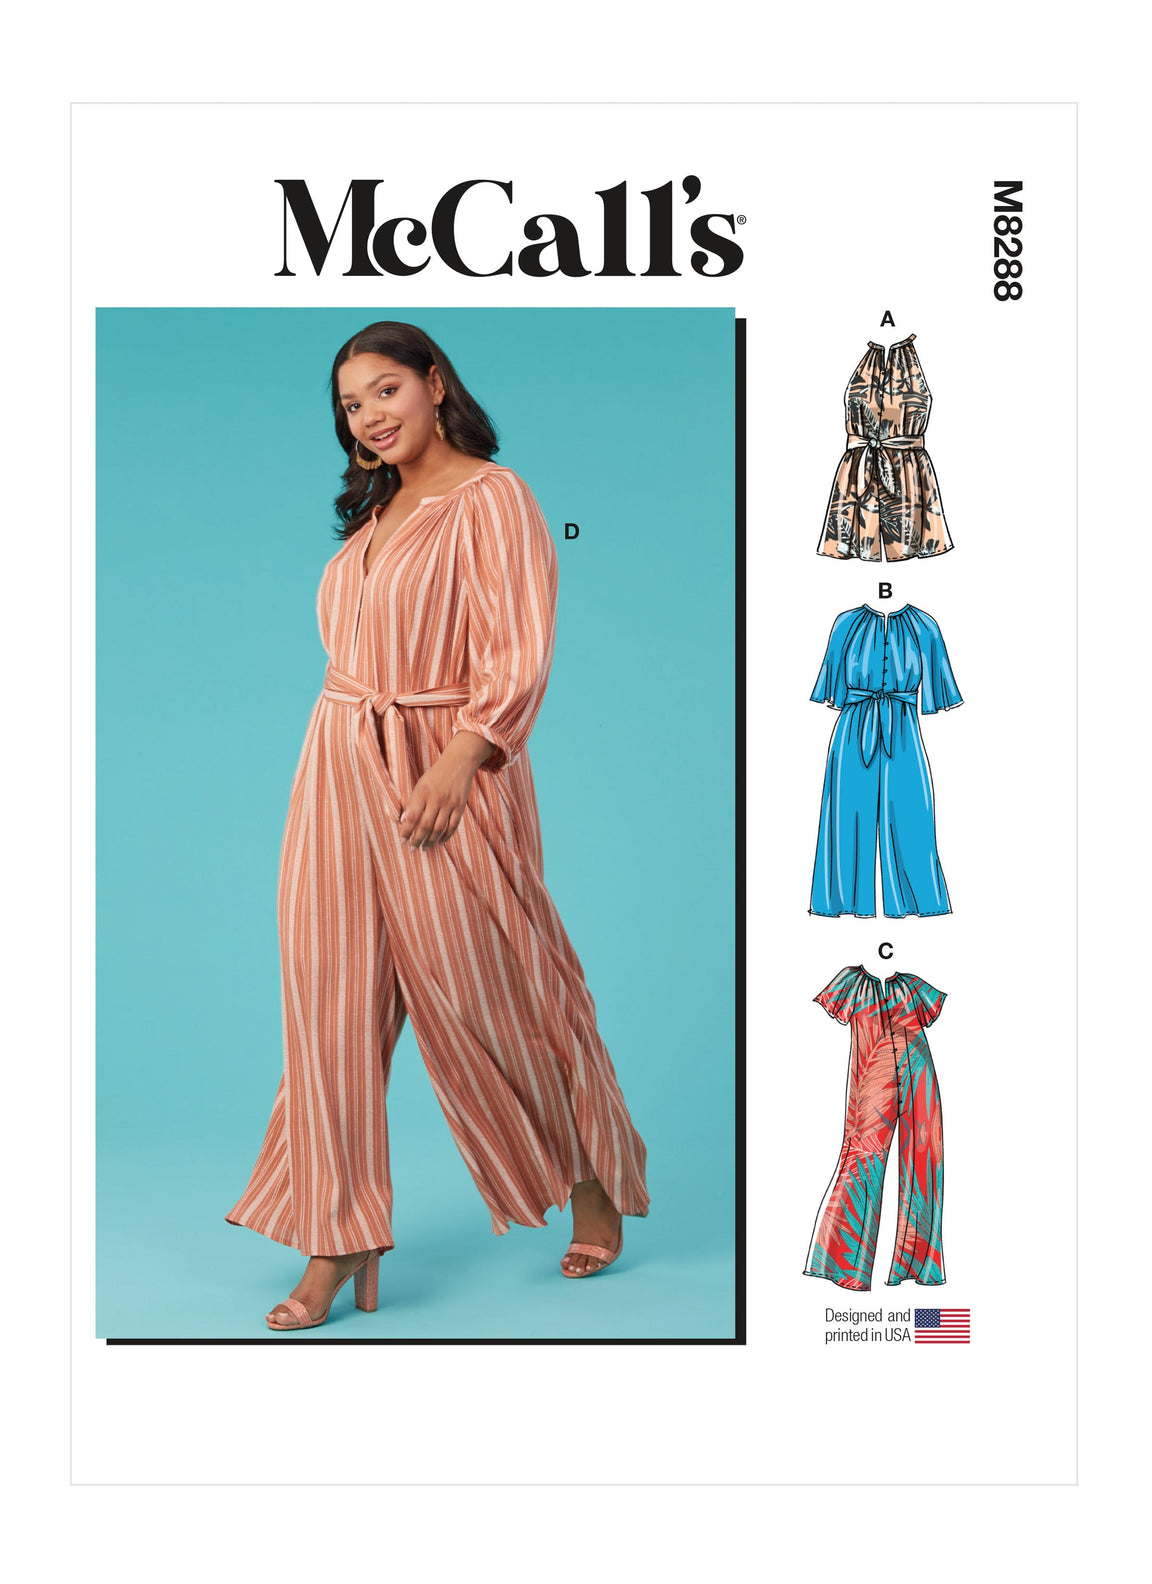 McCall's Sewing Patterns — Page 5 — jaycotts.co.uk - Sewing Supplies